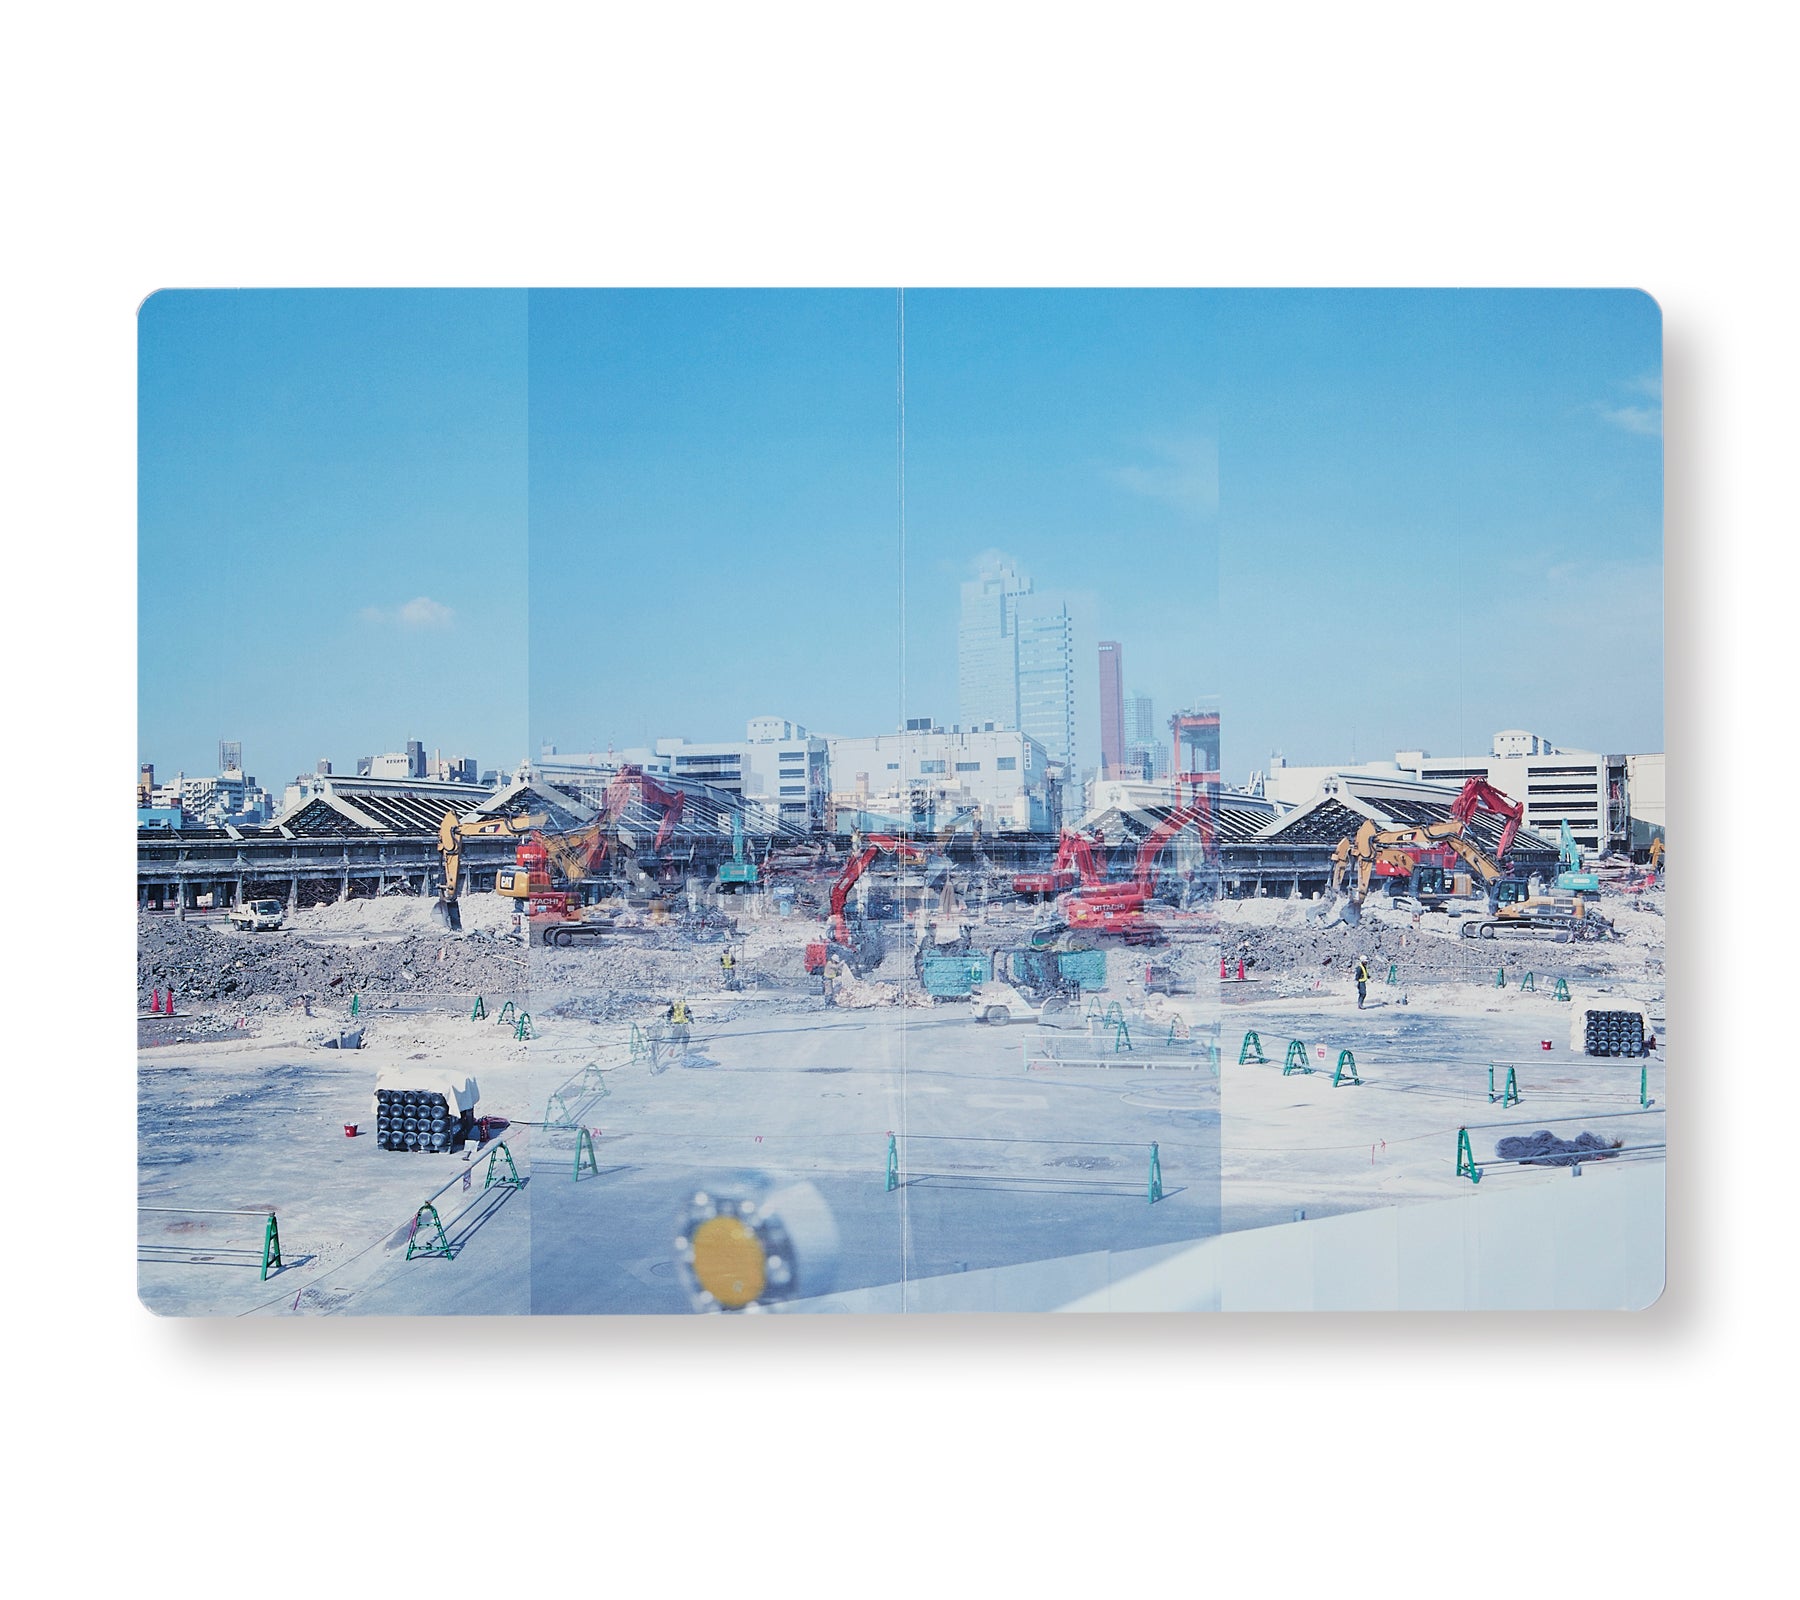 TOKYO OLYMPIA by Takashi Homma [SIGNED]